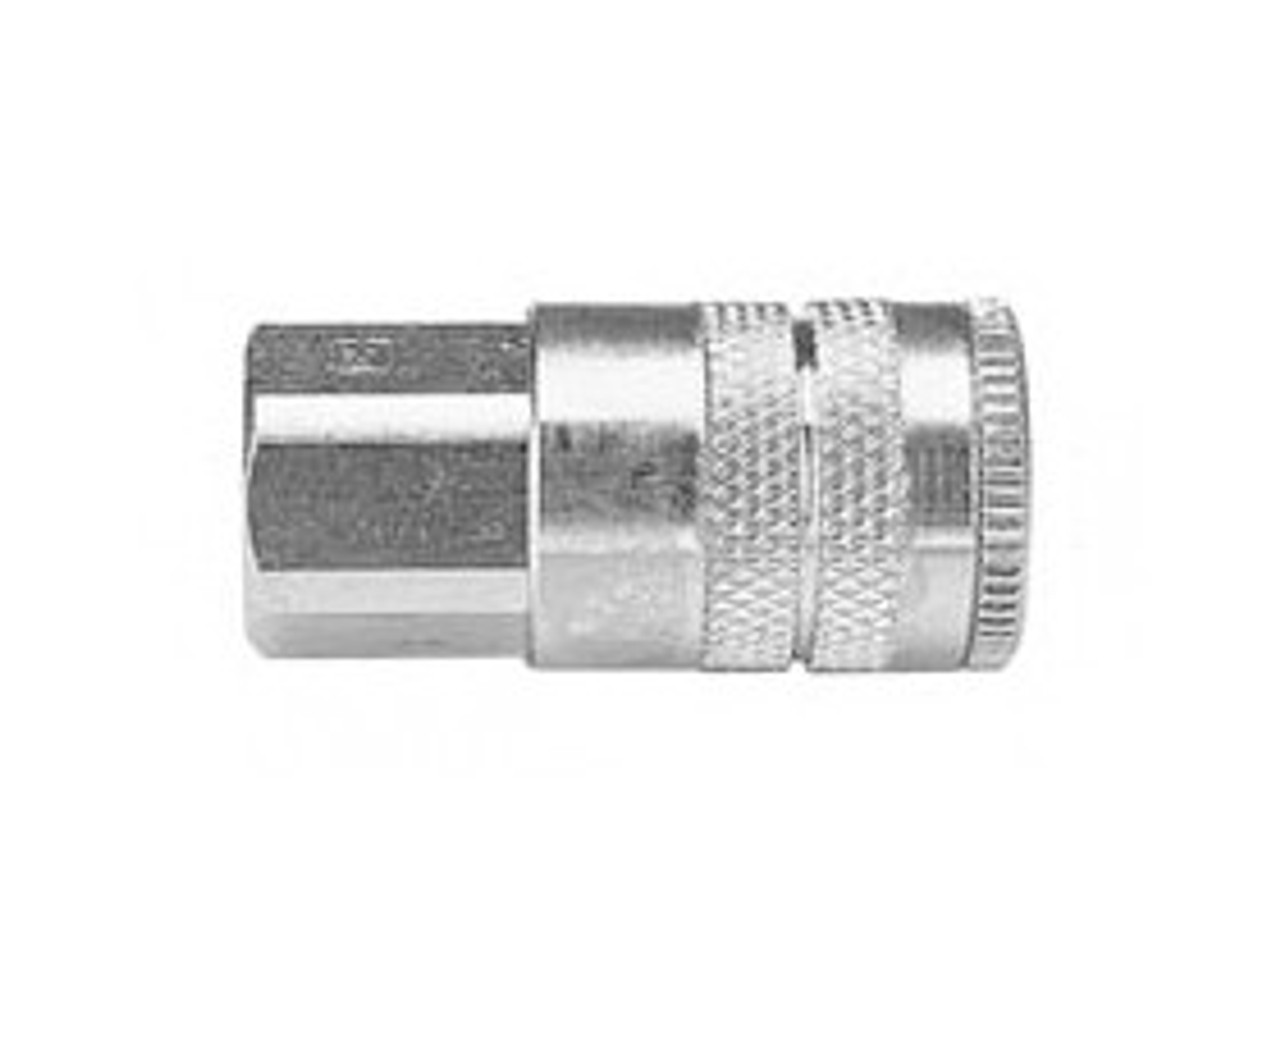 Parker 25C 20 Series Coupler Steel 3/8" Body Size 1/4" Npt Female Port General Purpose Accepts Industrial Interchange Nipples (A-A-59439 Mil-C-4109F Iso 6150-B) 27.4" Hg Vacuum-300Psi (21Bar) Wp Nbr Seals Temp F: (-40 To +250)